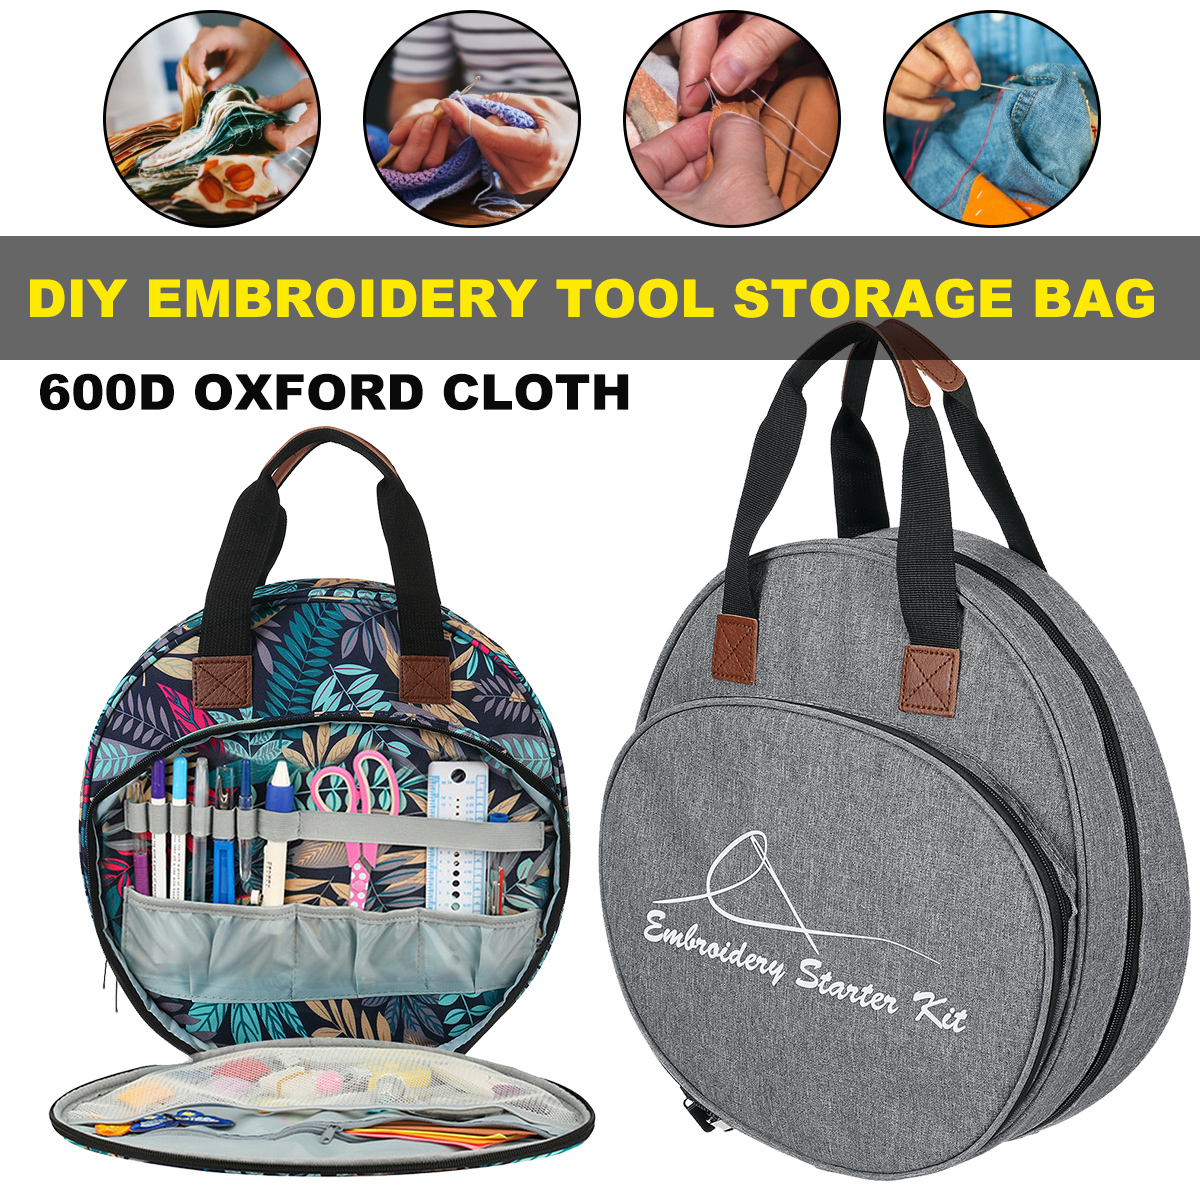 Durable-Portable-Large-Capacity-DIY-Embroidery-Tool-Storage-Bag-1820713-1